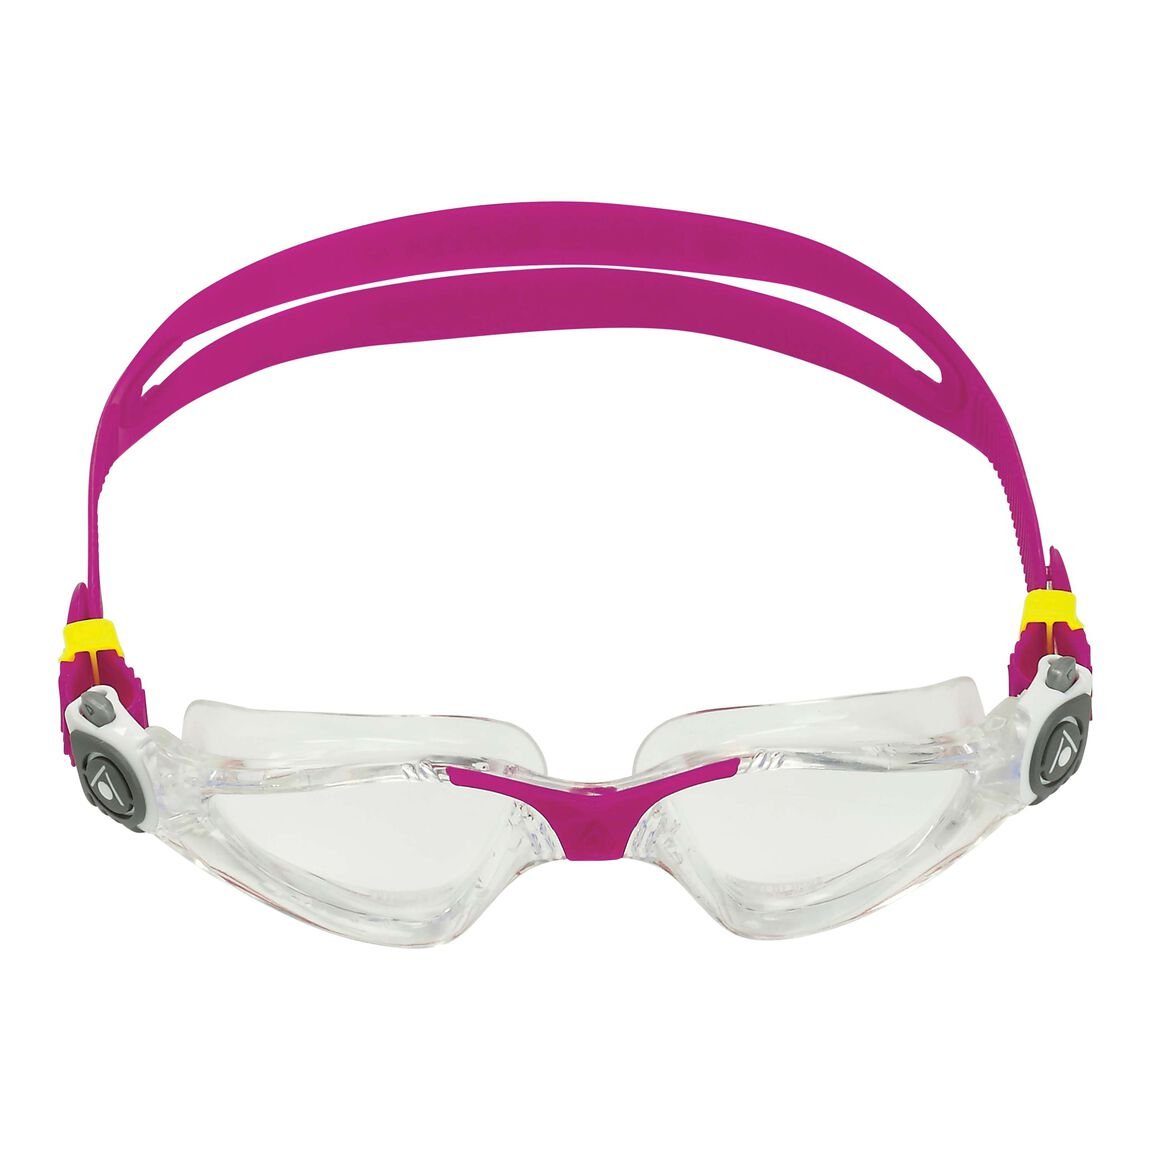 Compact 0016LC Schwimmbrille RASPBERRYY Kayenne Schwimmbrille Aquasphere Aquasphere TRANSPARENT